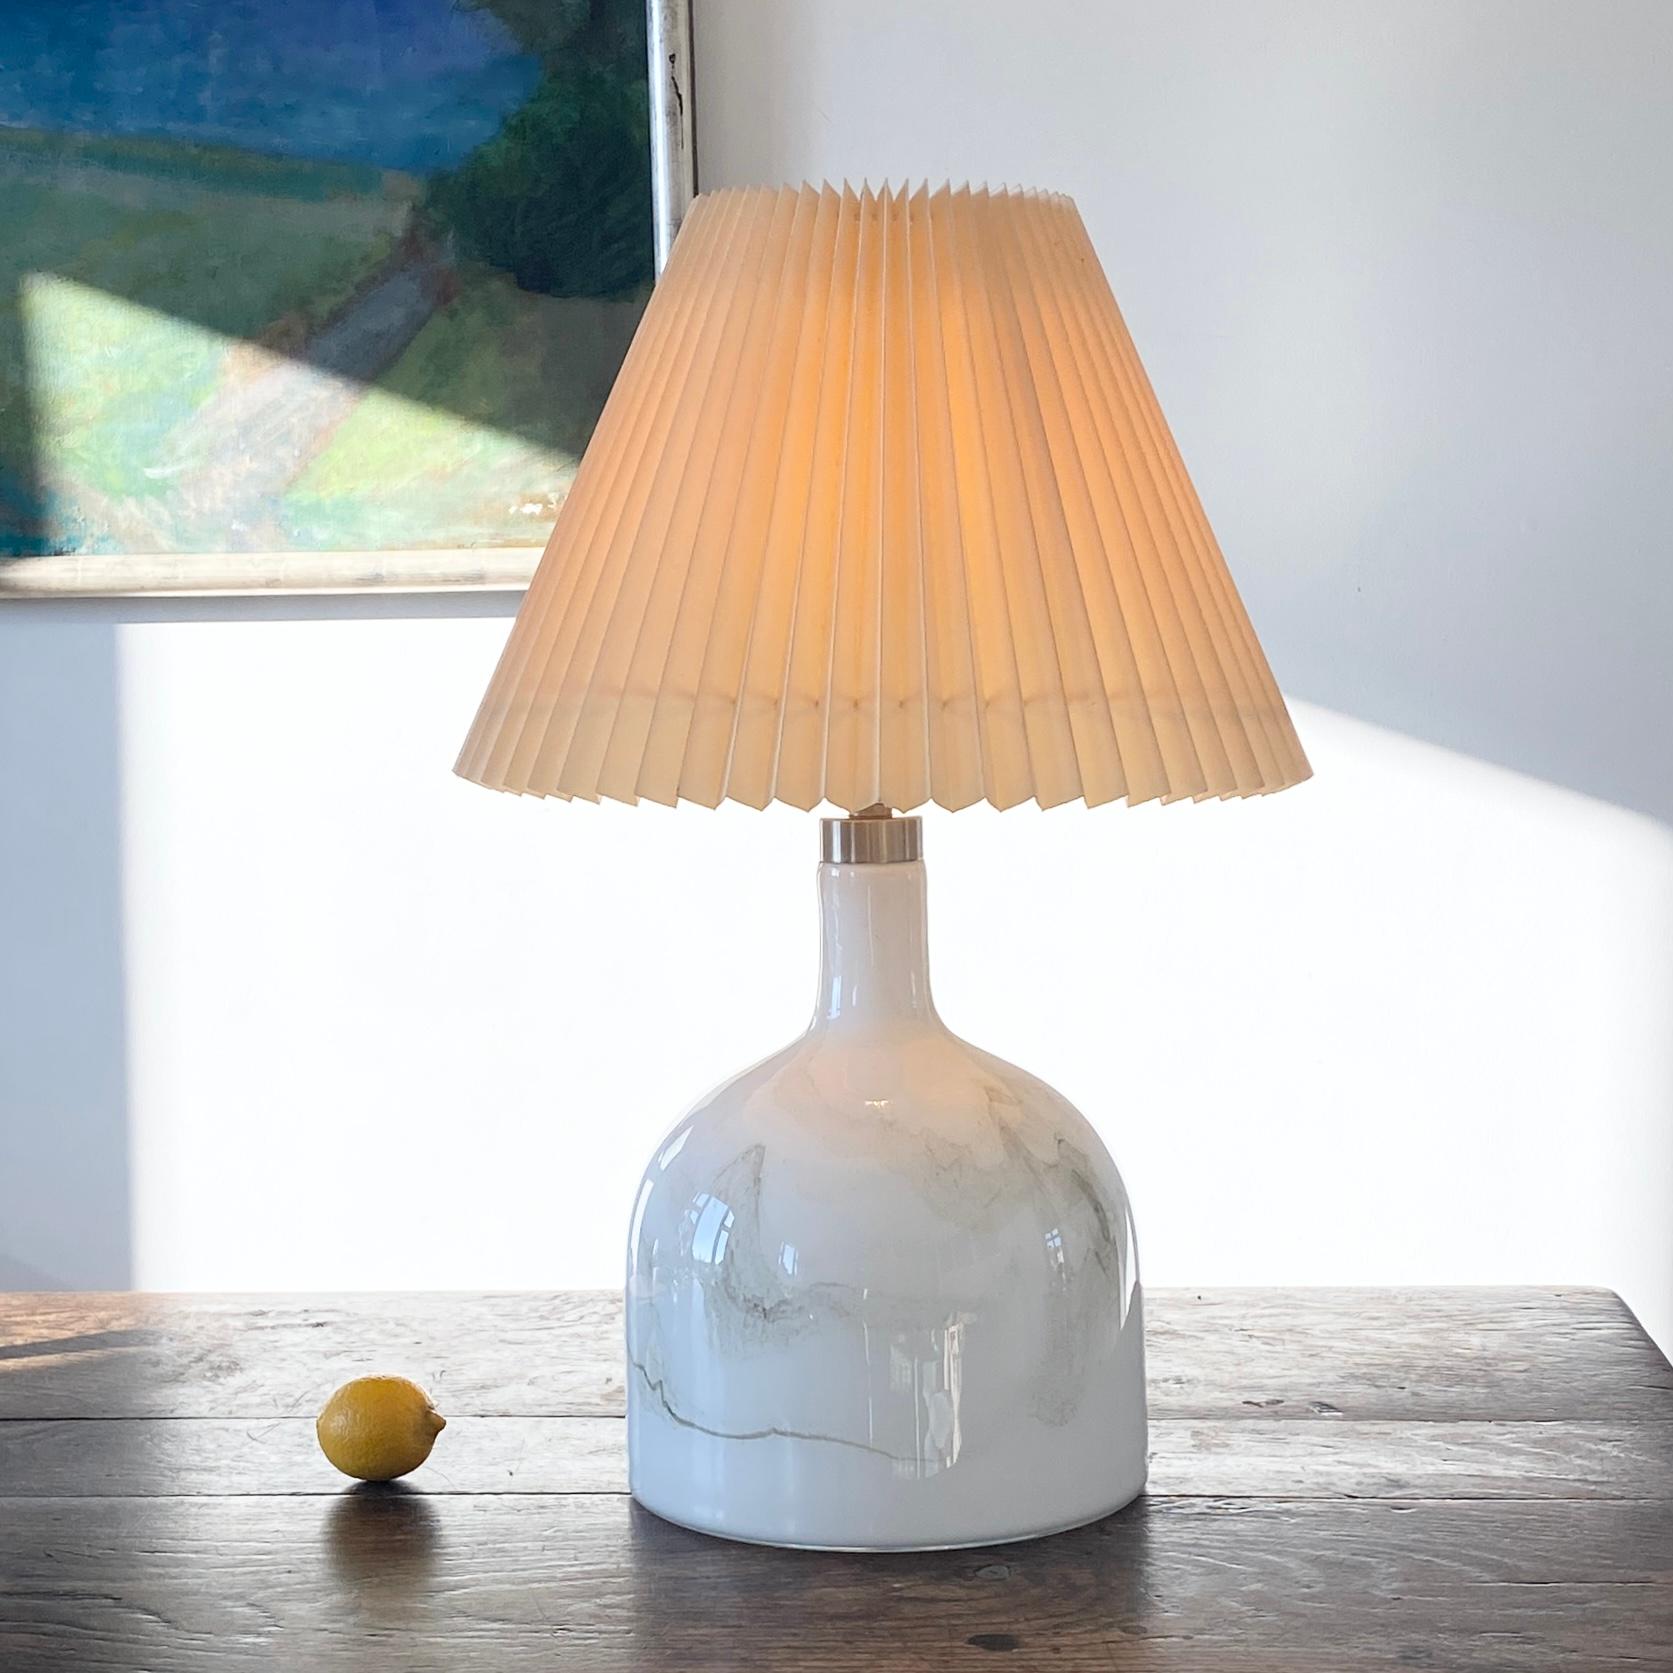 Danish Sakura Holmegaard table lamp by Michael Bang For Holmegaard.
The Sakura table lamp is made in thick white and grey opaline glass. The lamp is made by melted glass swirls underlying the smooth clear glass, giving the feeling of the thick heavy